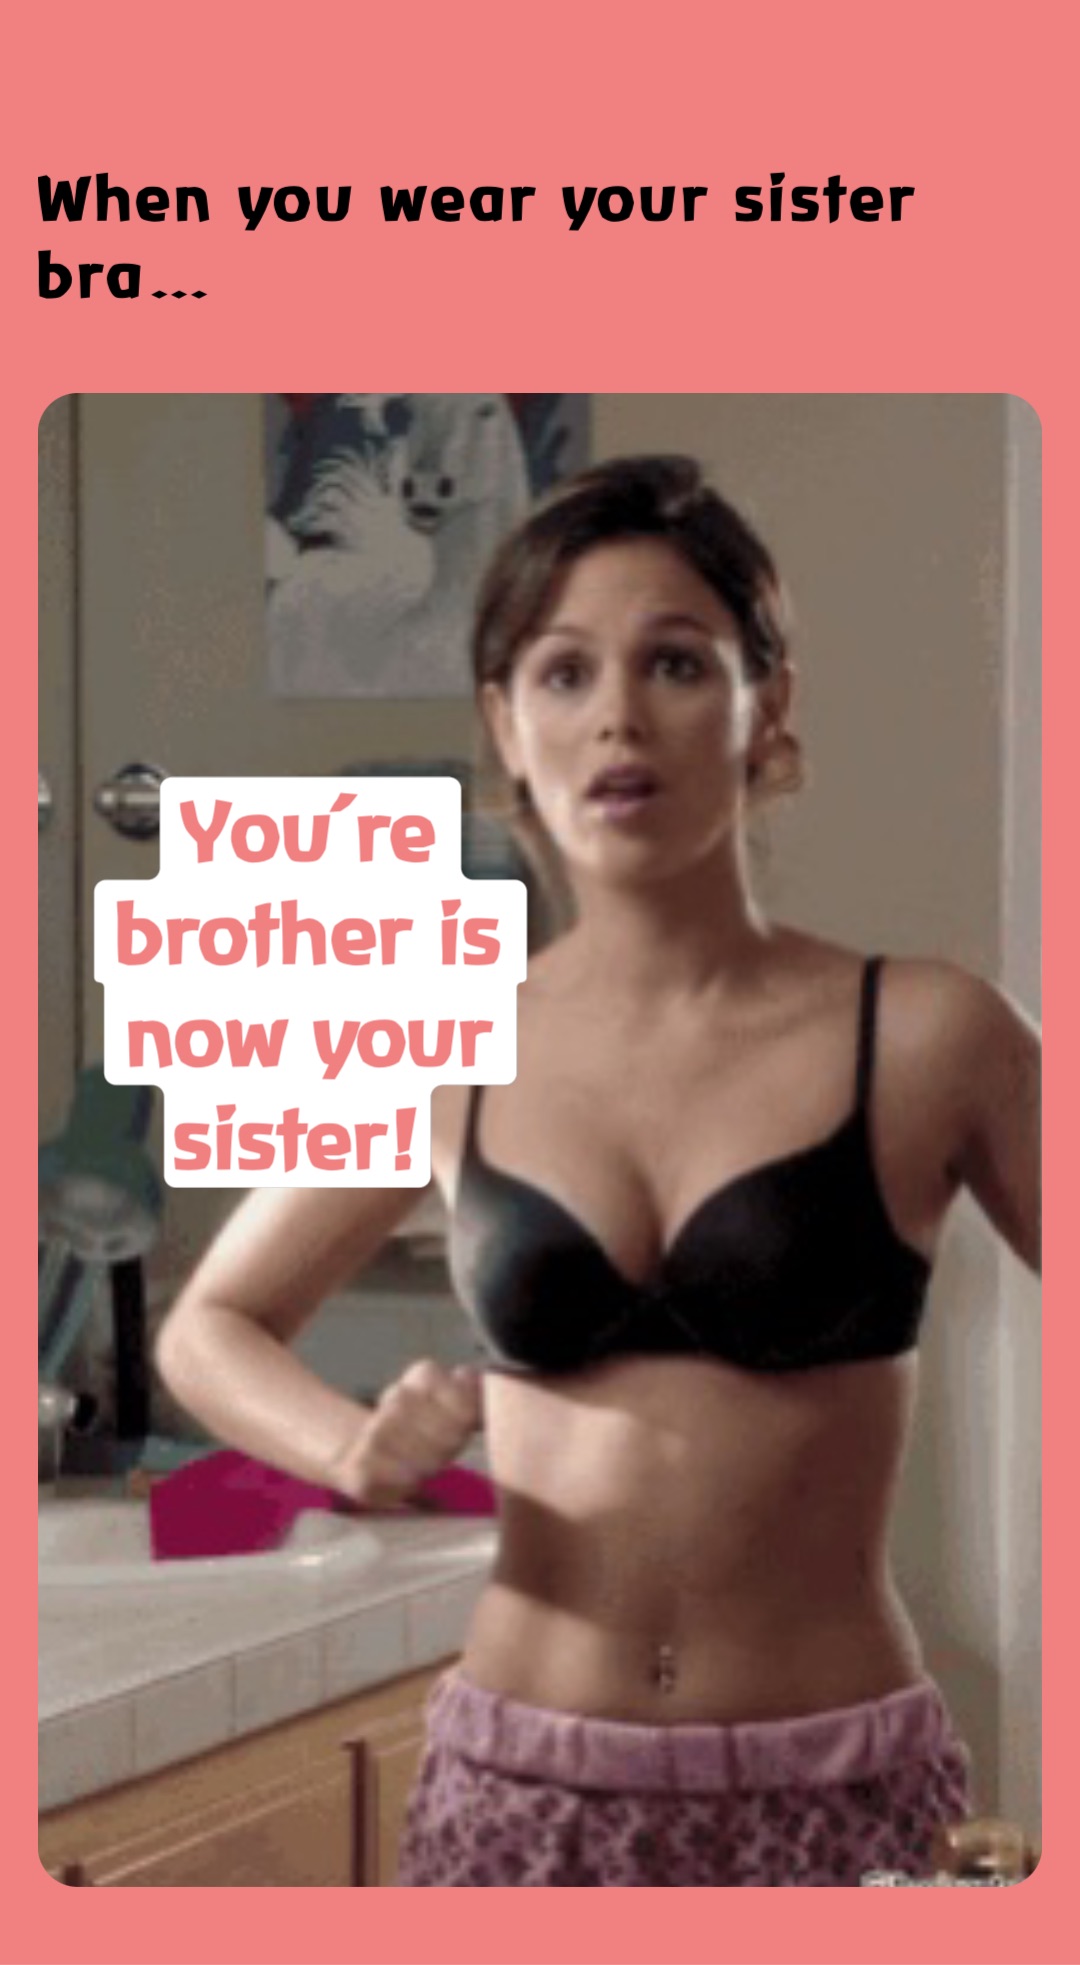 Sister Bra, You Could Get Your Bra